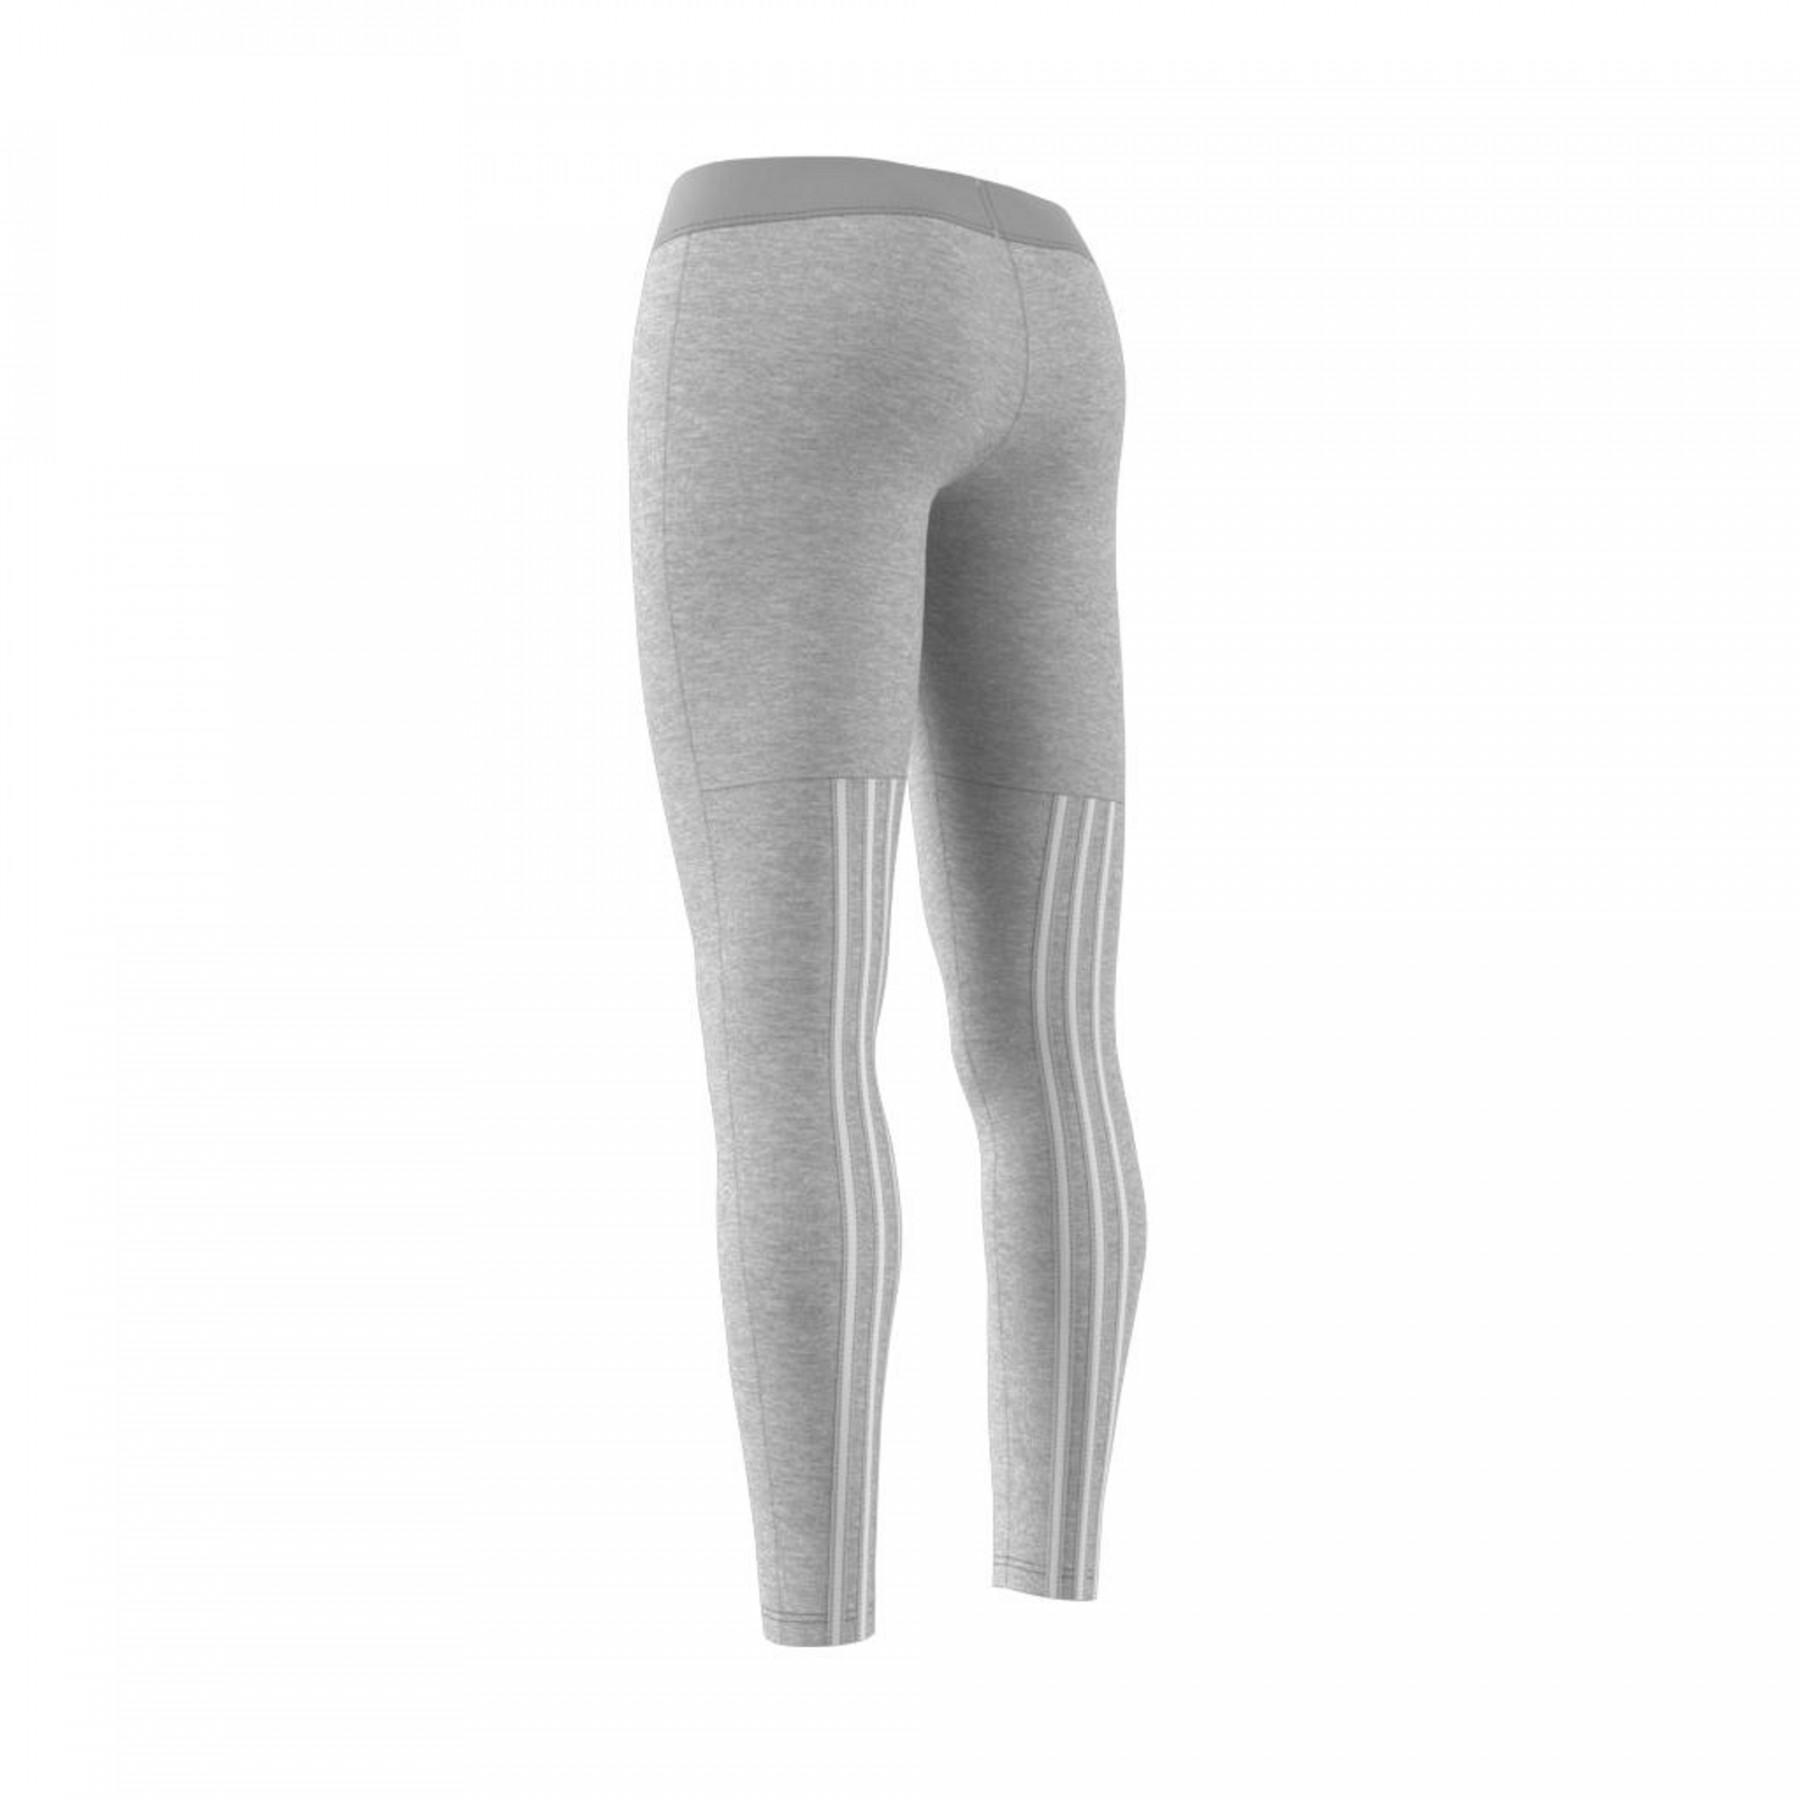 Women's tights adidas Must Haves 3-Stripes